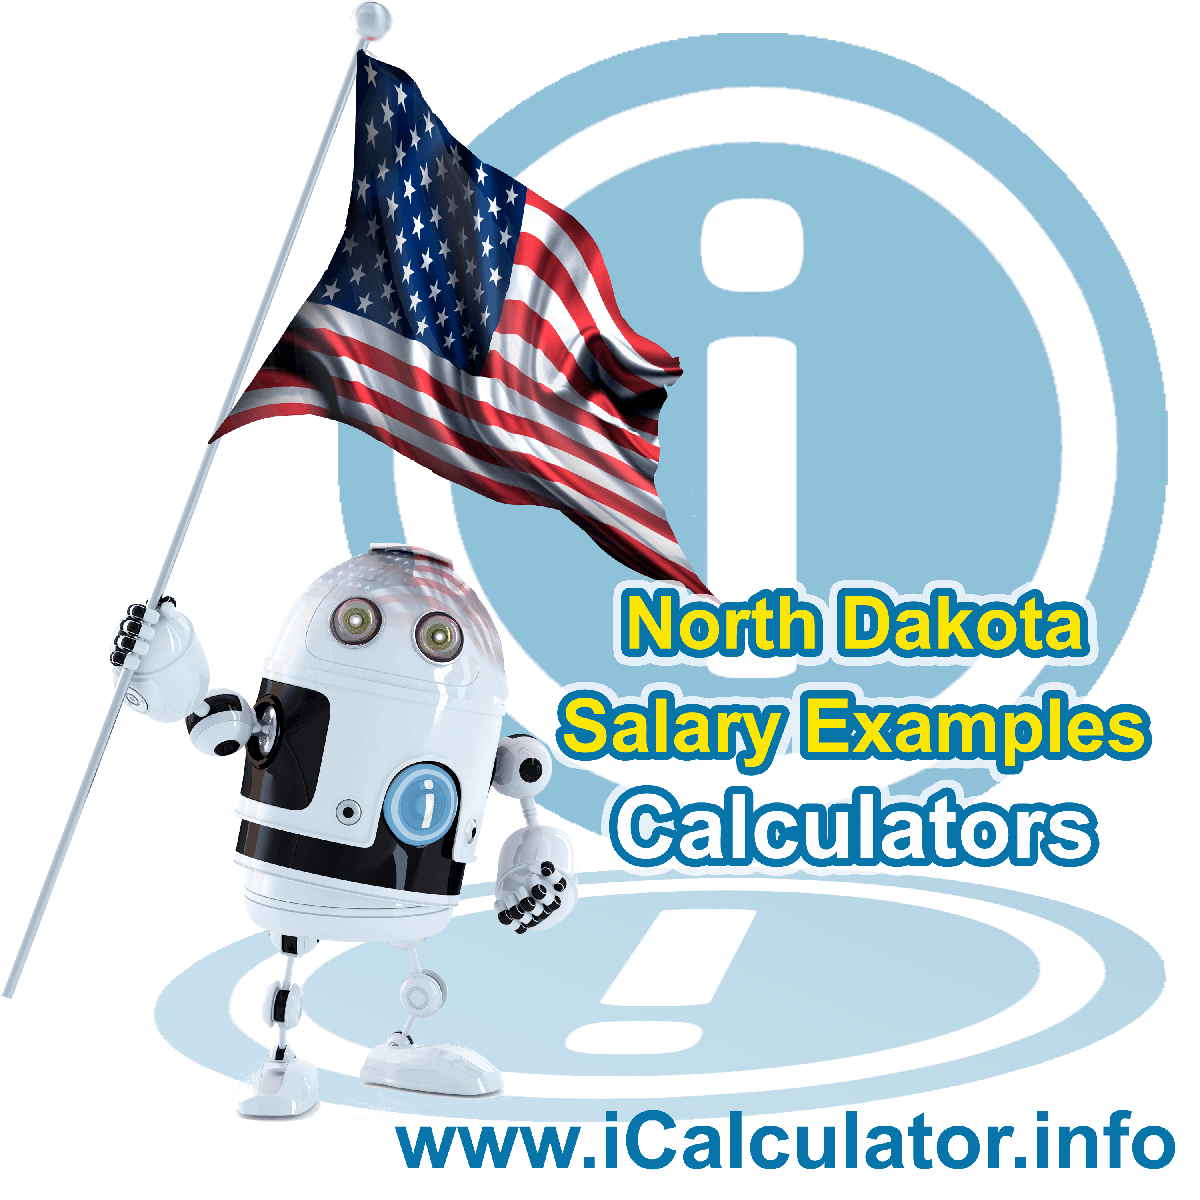 North Dakota Salary Example for $ 240,000.00 in 2023 | iCalculator™ | $ 240,000.00 salary example for employee and employer paying North Dakota State tincome taxes. Detailed salary after tax calculation including North Dakota State Tax, Federal State Tax, Medicare Deductions, Social Security, Capital Gains and other income tax and salary deductions complete with supporting North Dakota state tax tables 